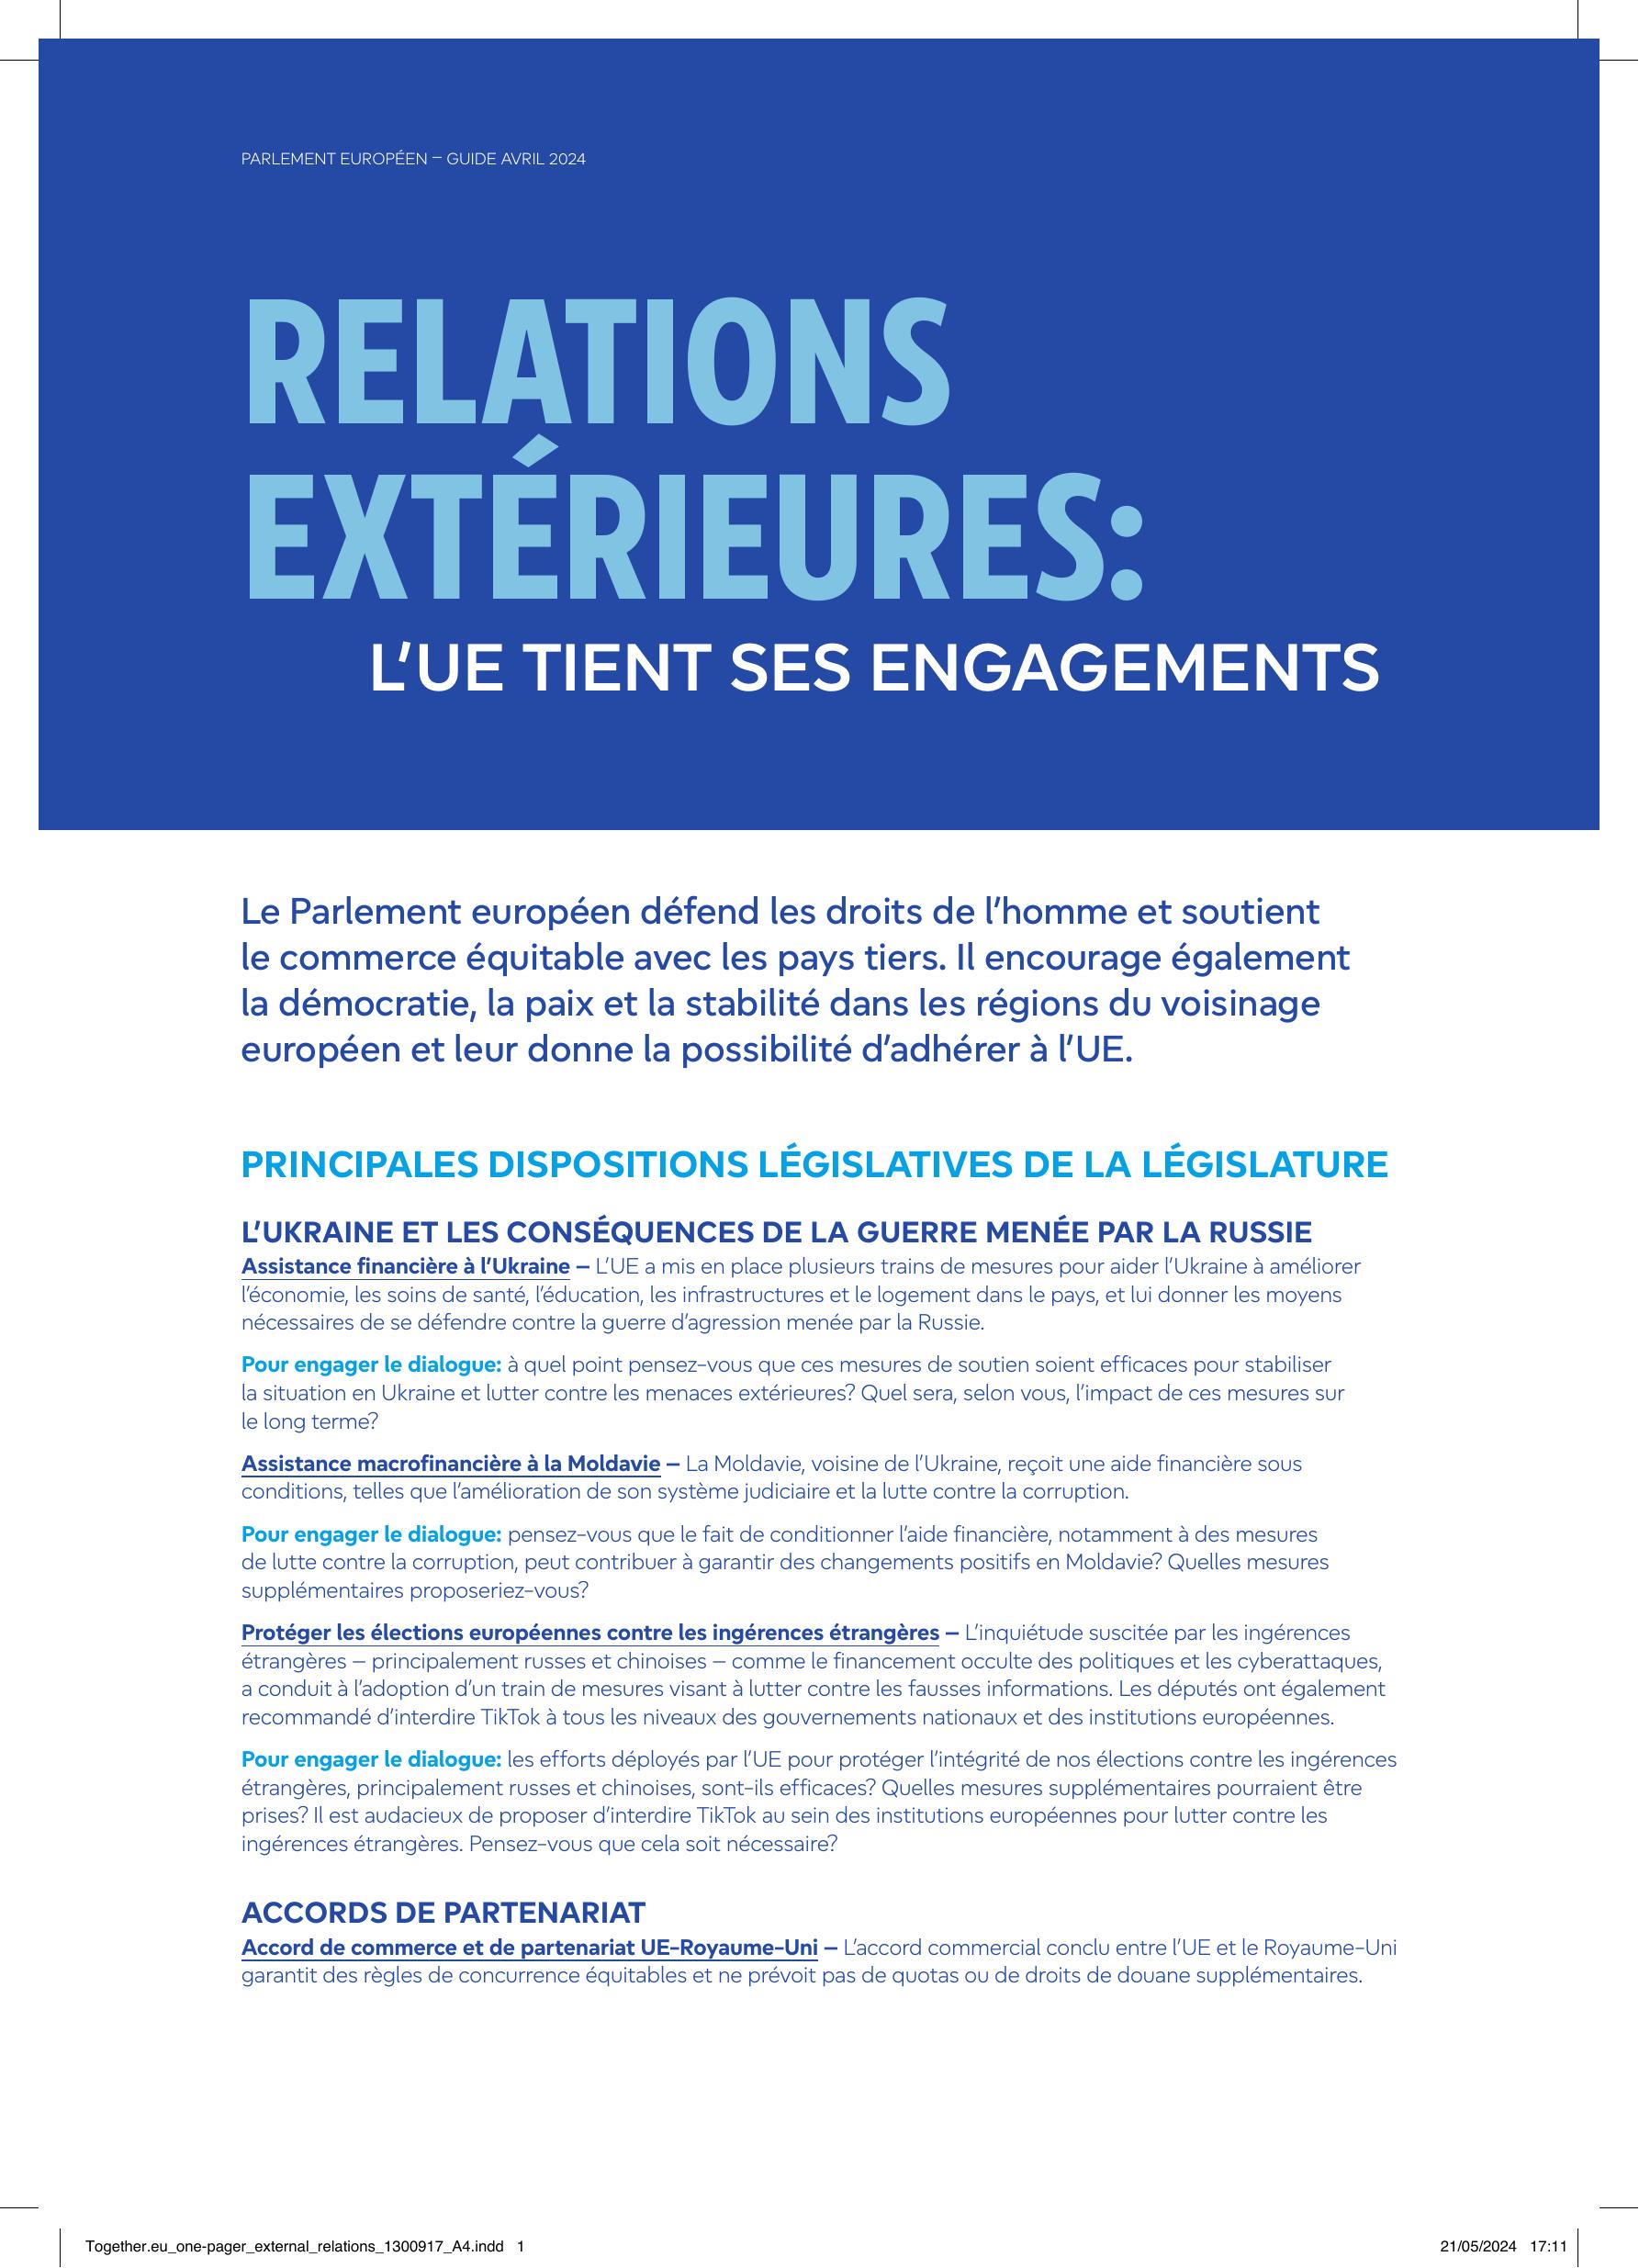 Together.eu_one-pager_external_relations_print.pdf